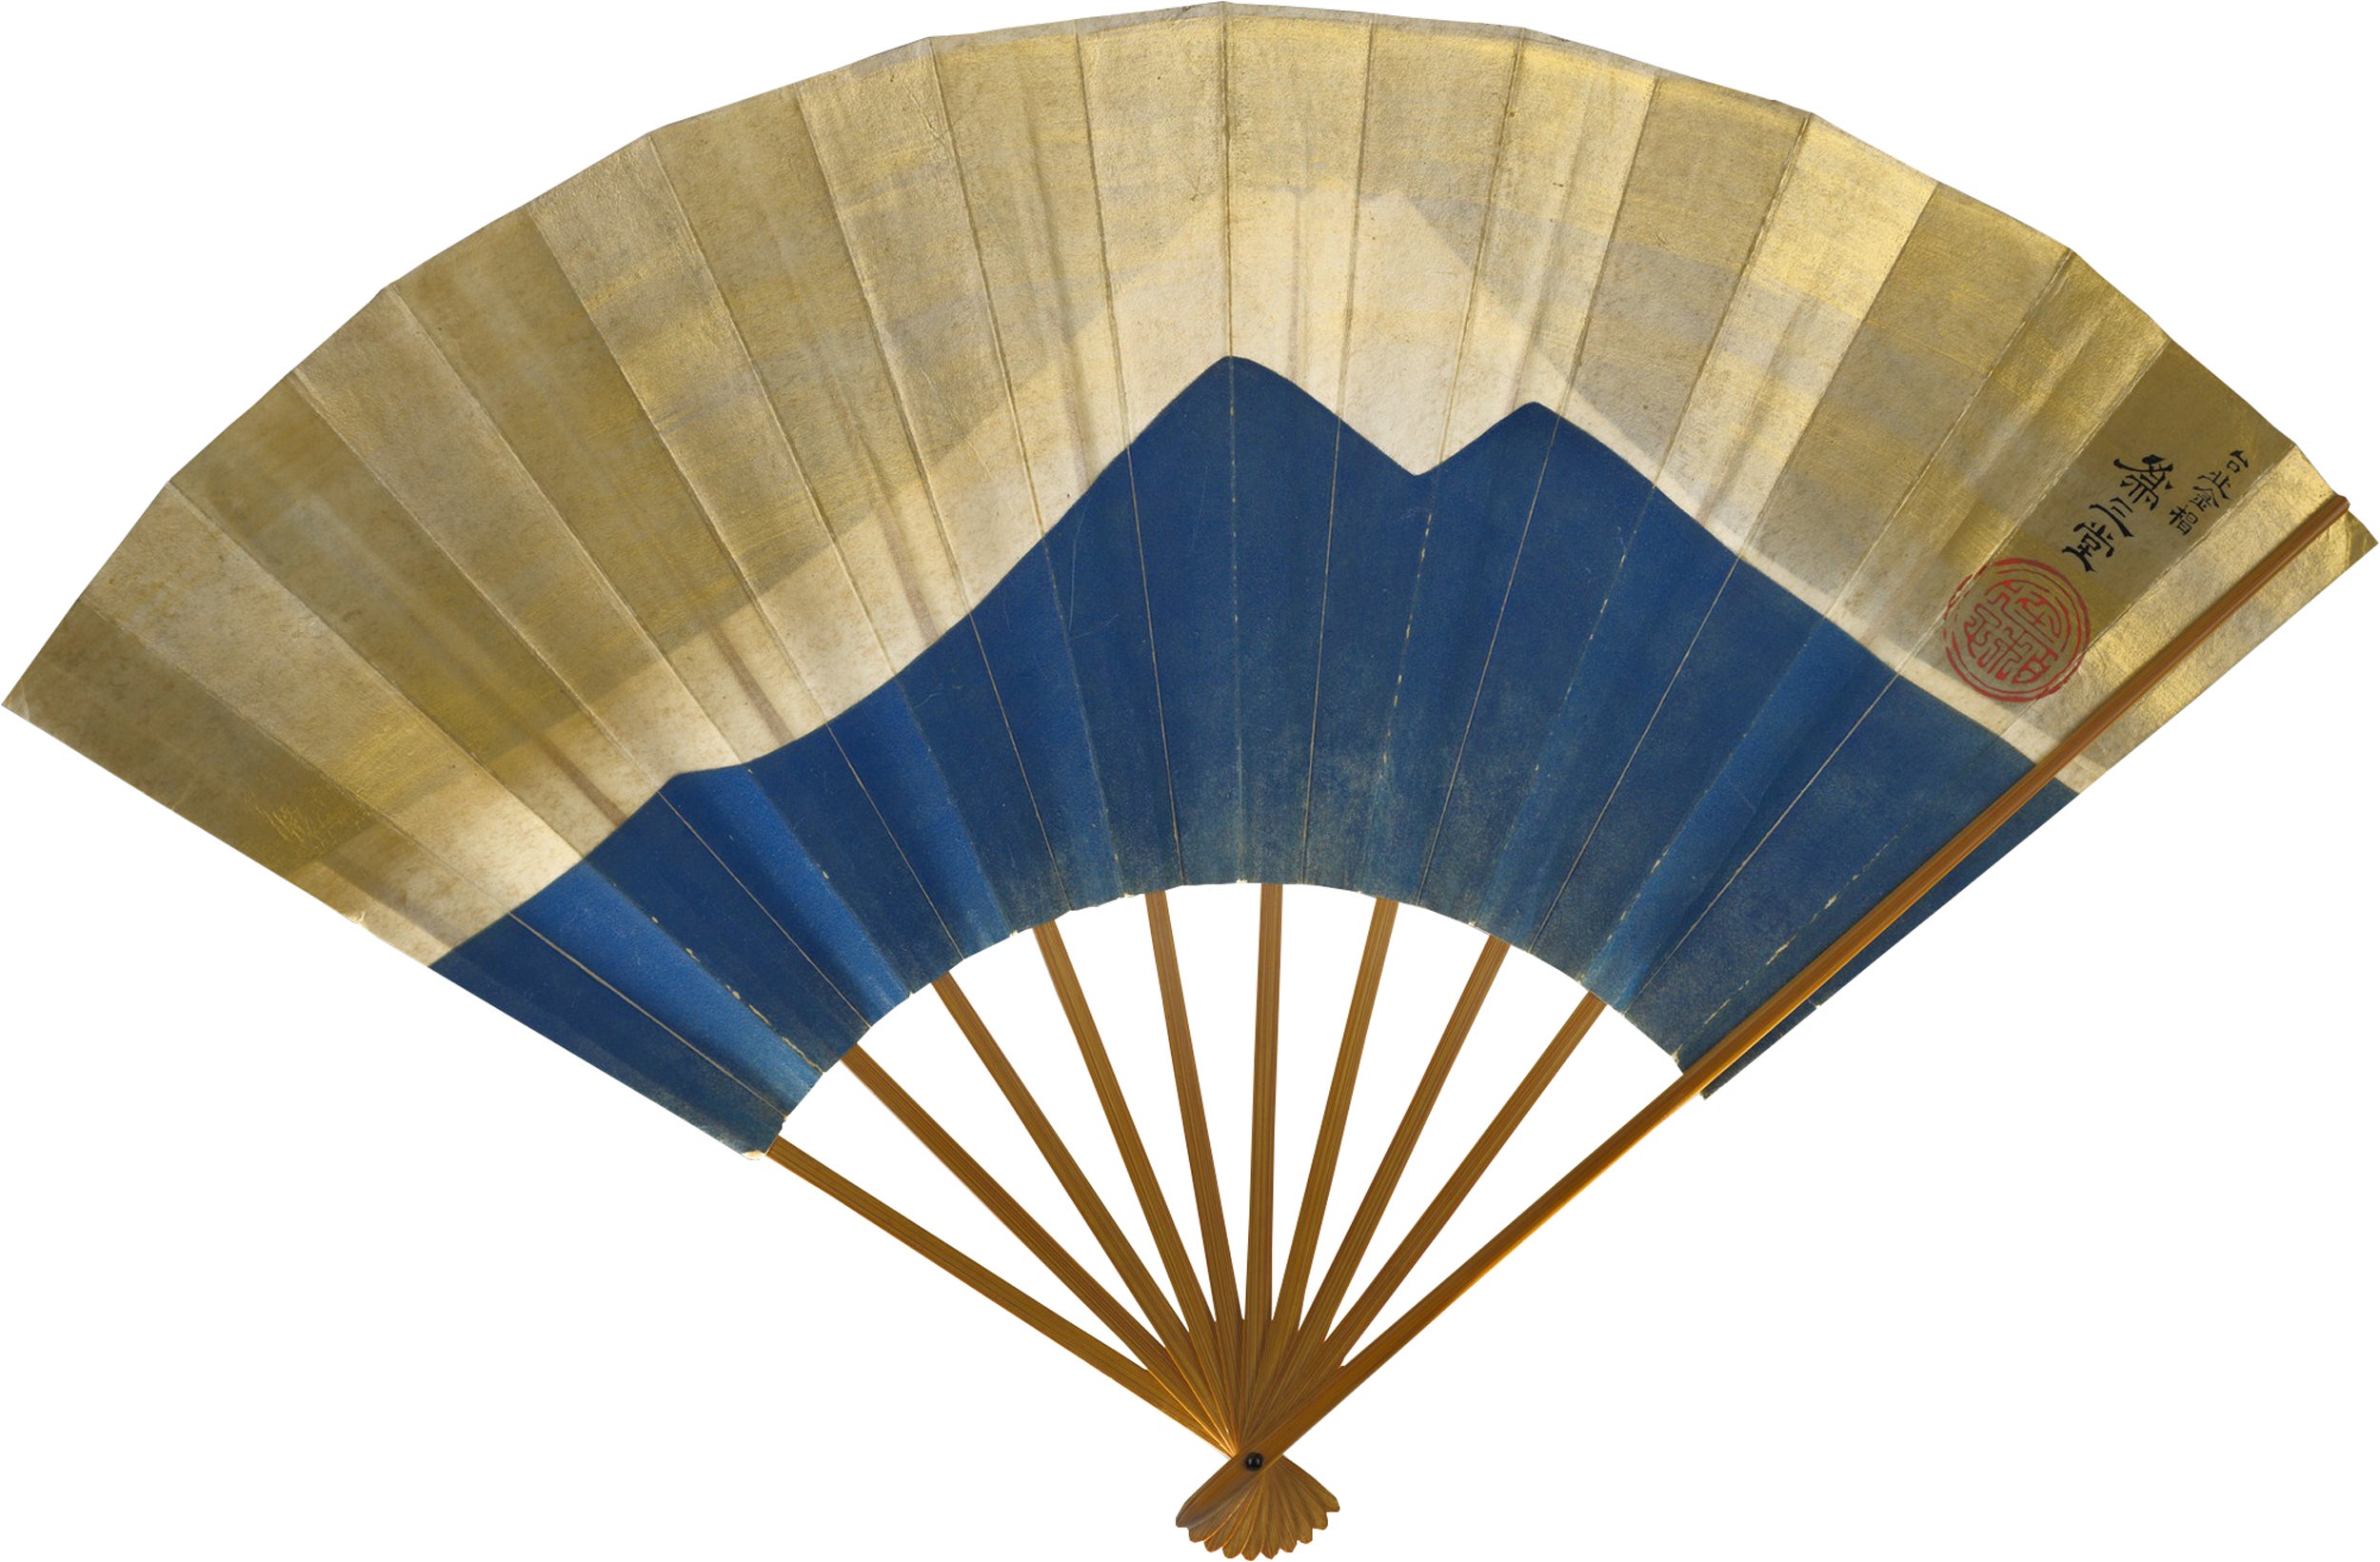 folding fan painted with blue silhouette of mountain.